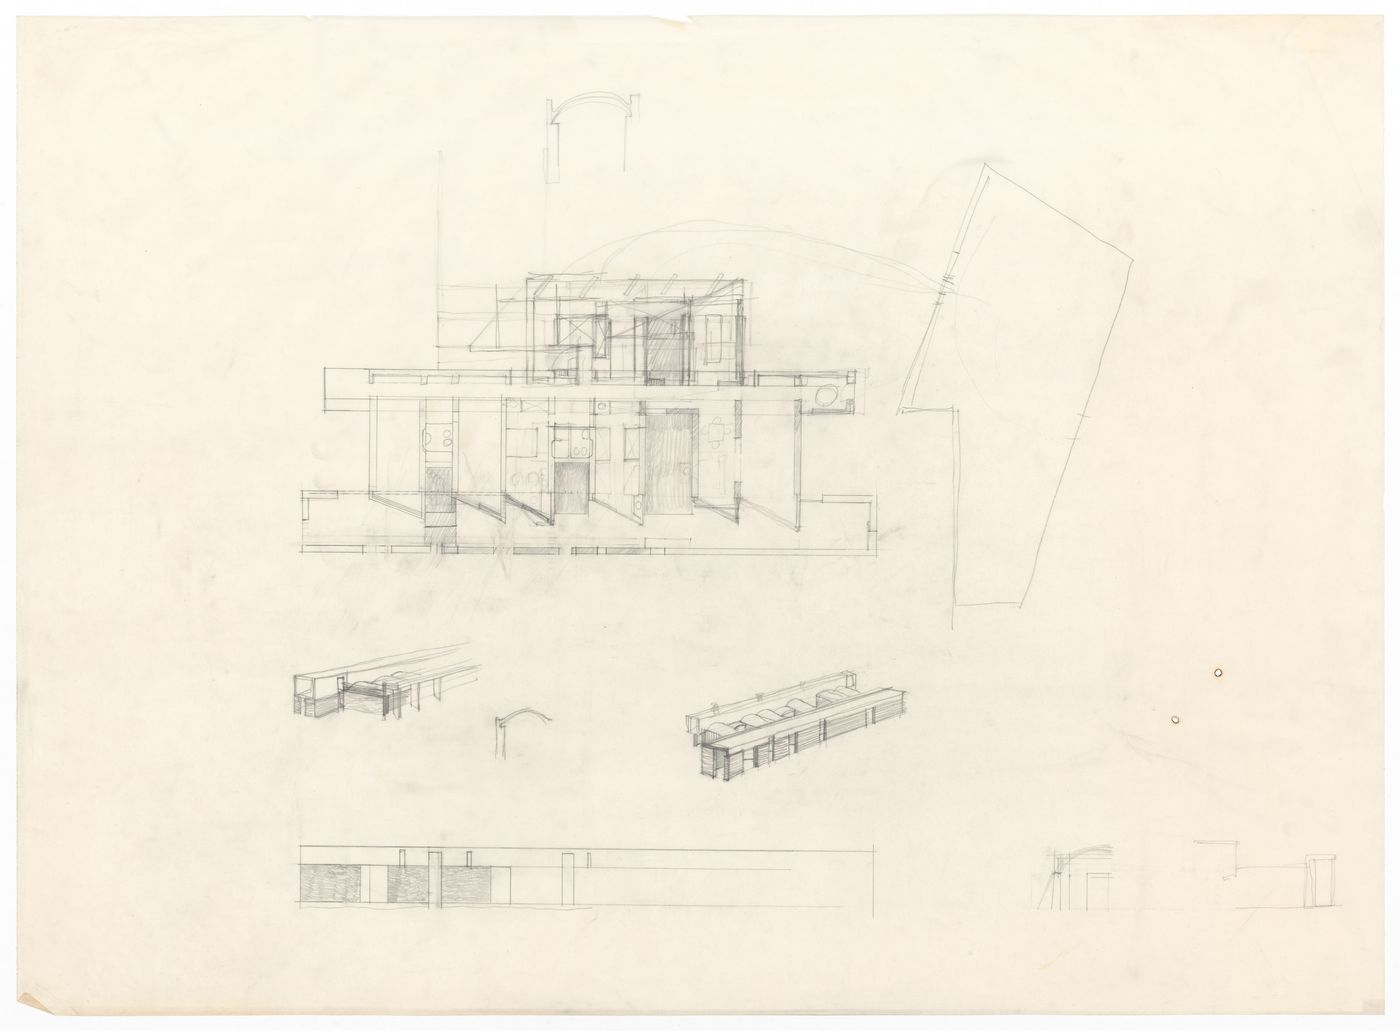 Section and detail sketches for Case Di Palma, Stintino, Italy